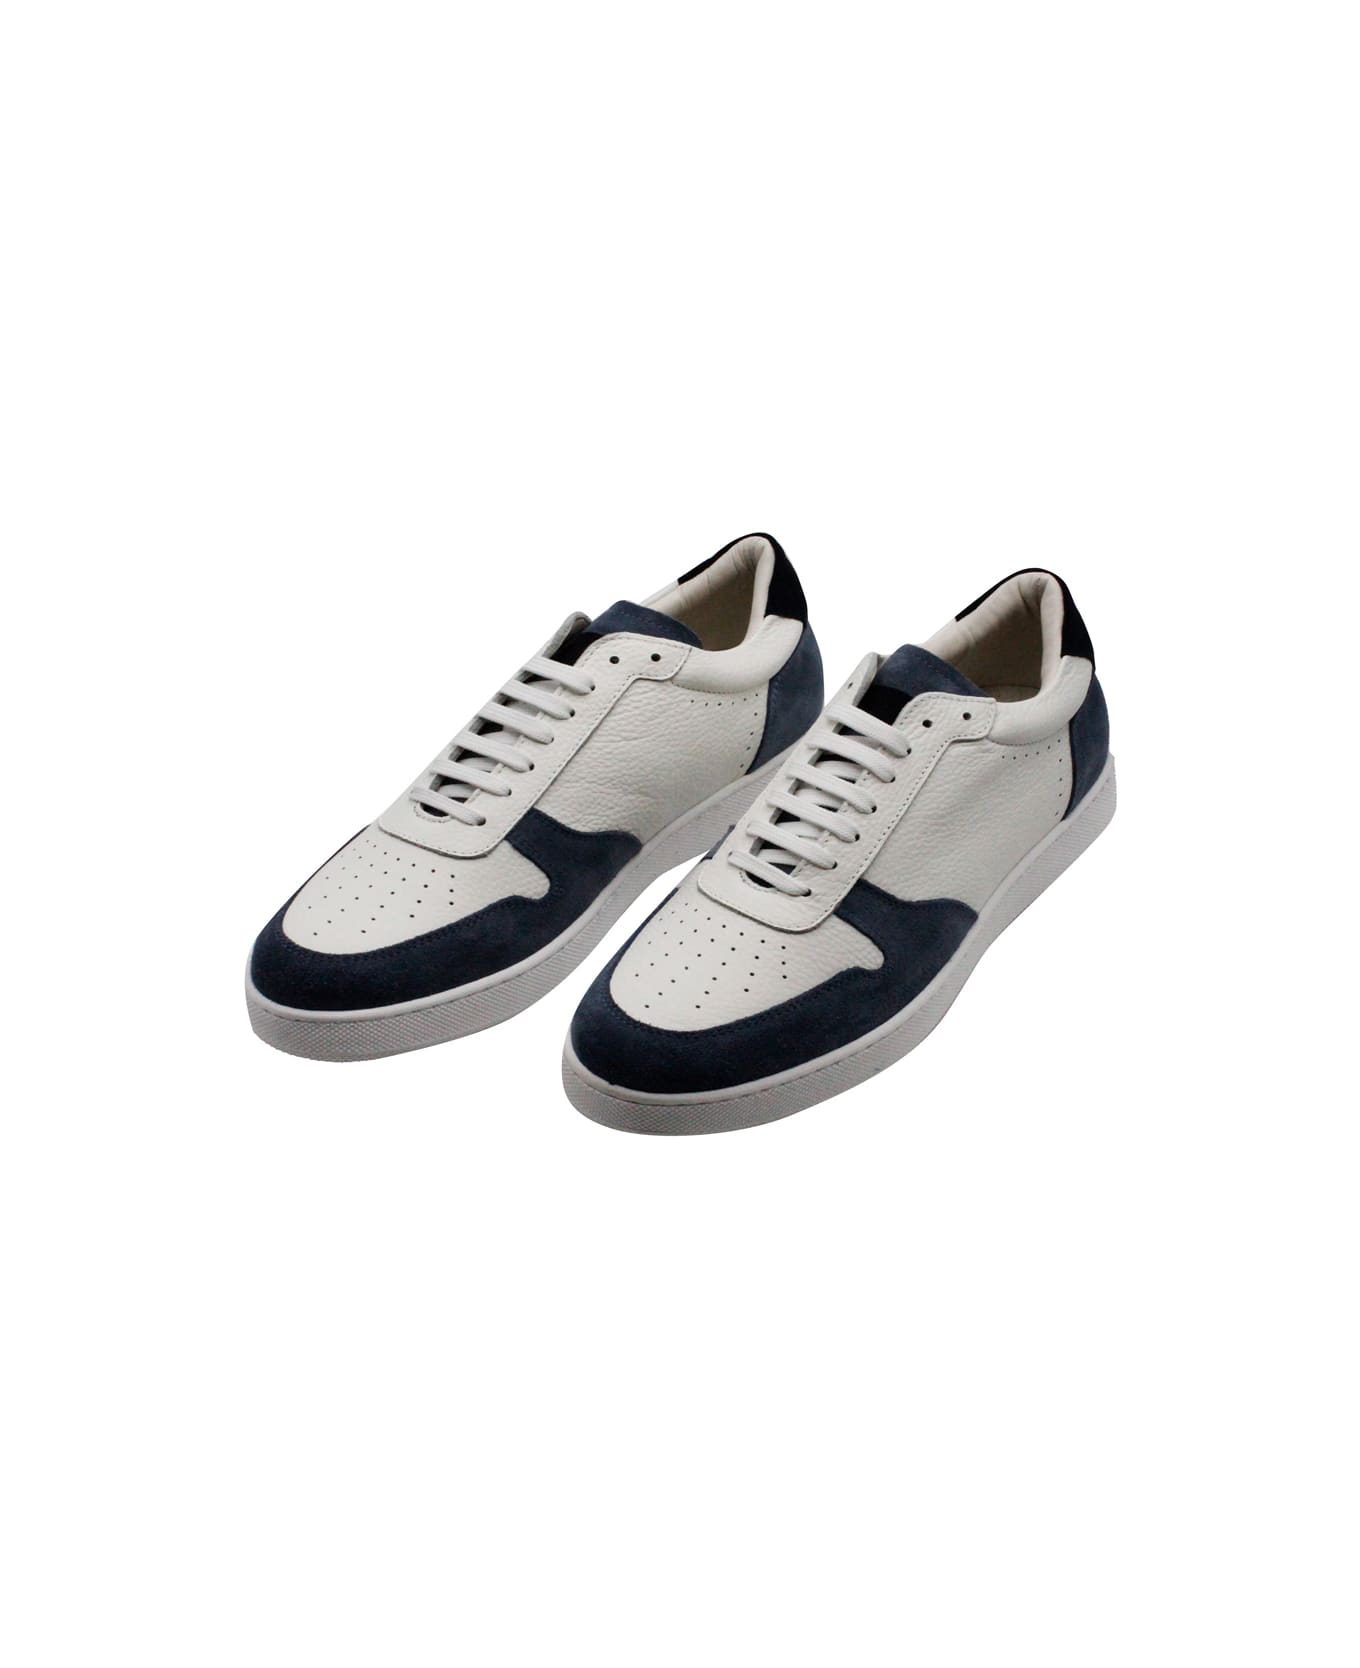 Barba Napoli Sneakers In Soft And Fine Leather With Contrasting Color Suede Details With Lace Closure And Suede Back - Light Blu